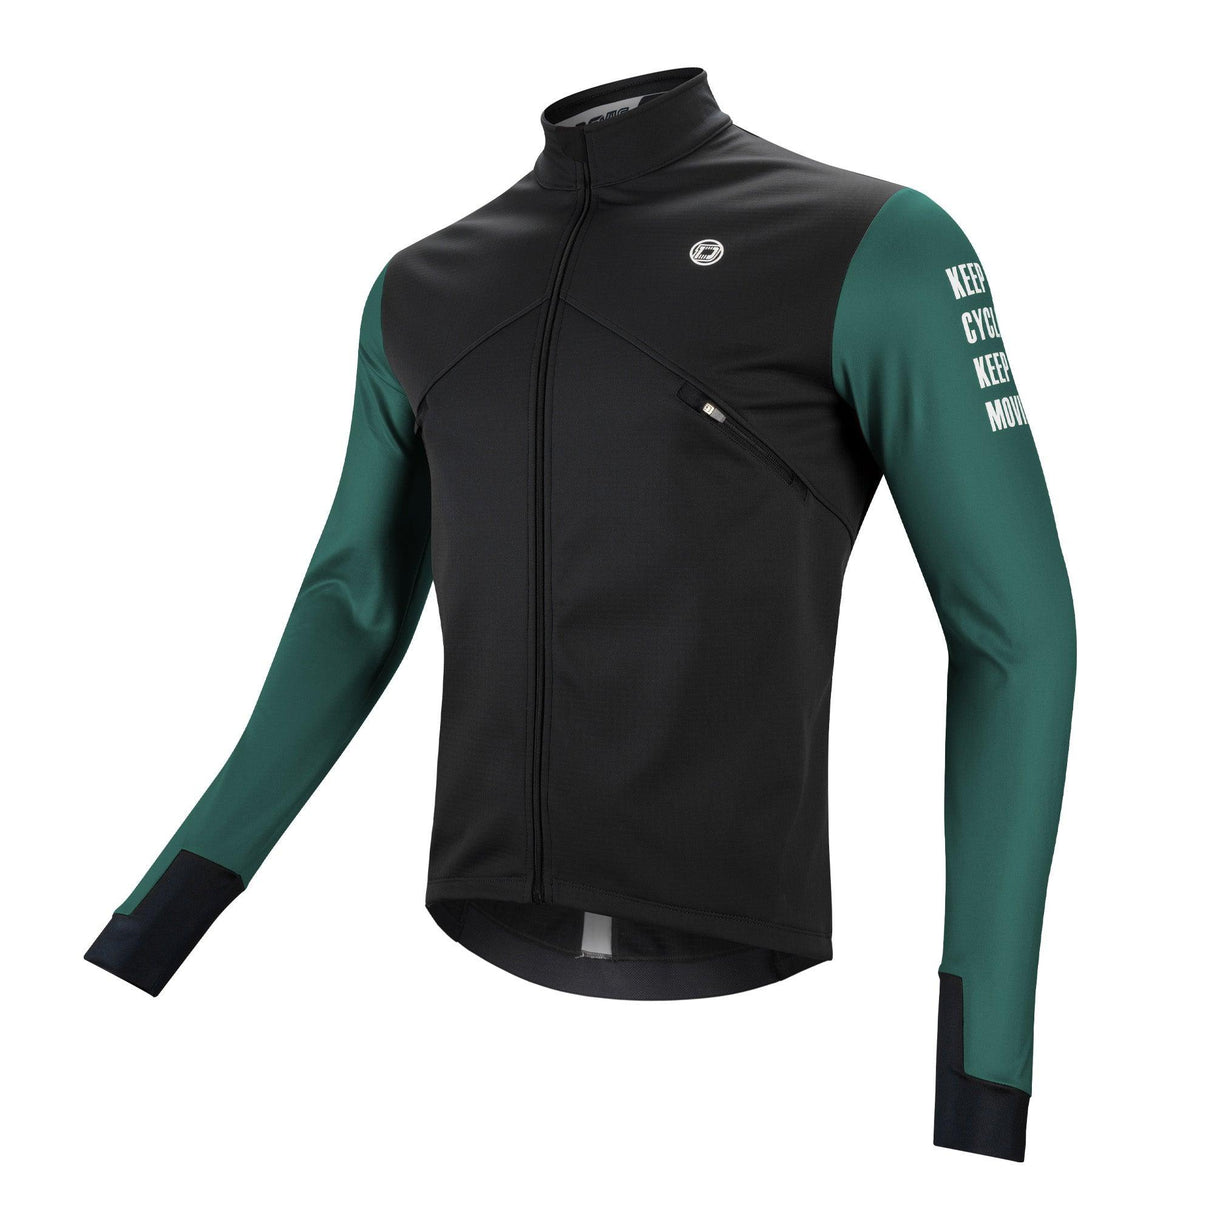 FROSTAIR 2.0 CYCLING JACKET-Black/Green-Side